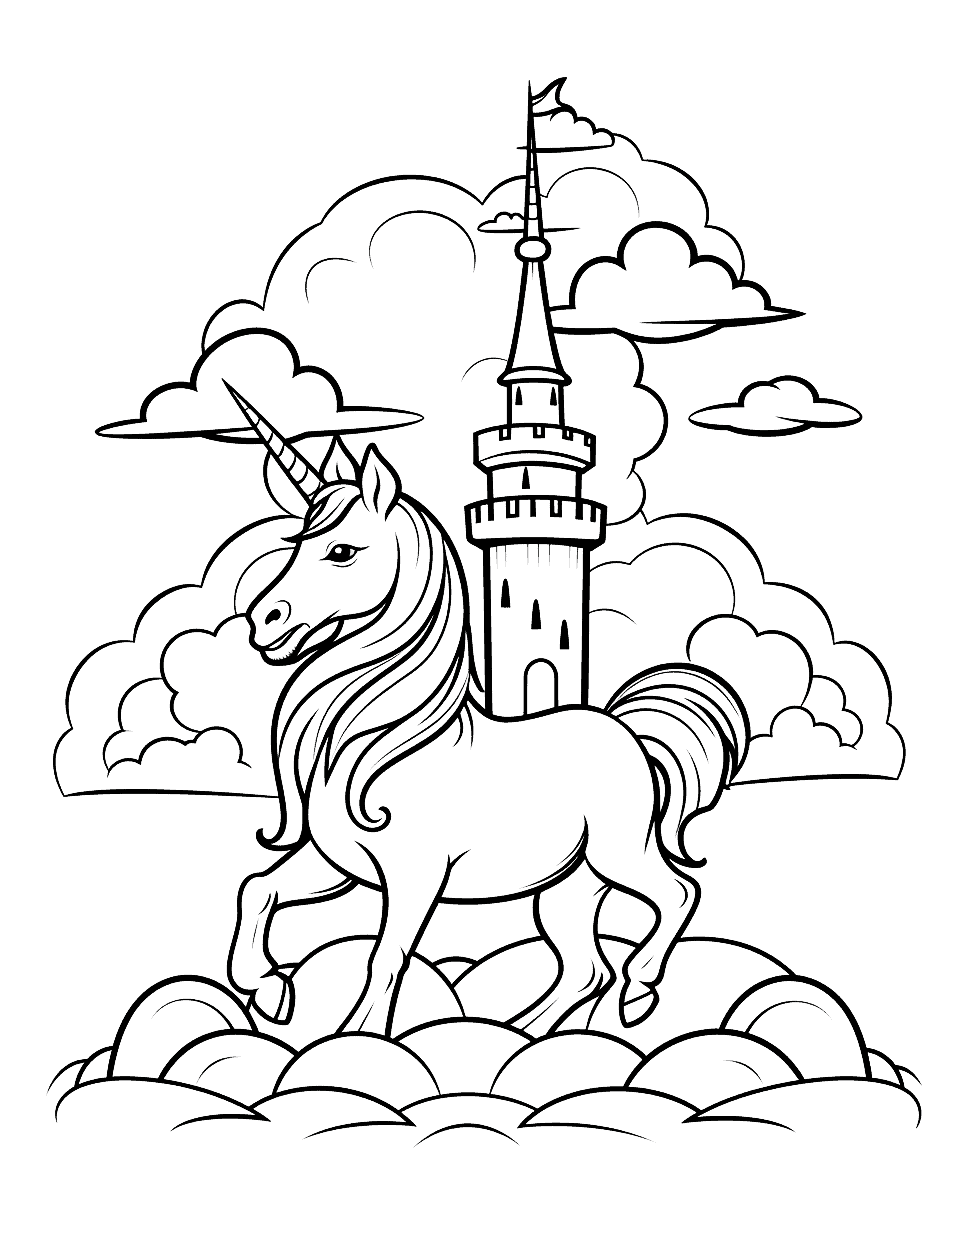 Unicorn and the Cloud Castle Coloring Page - A unicorn on a cloud, looking at a grand castle made of clouds.